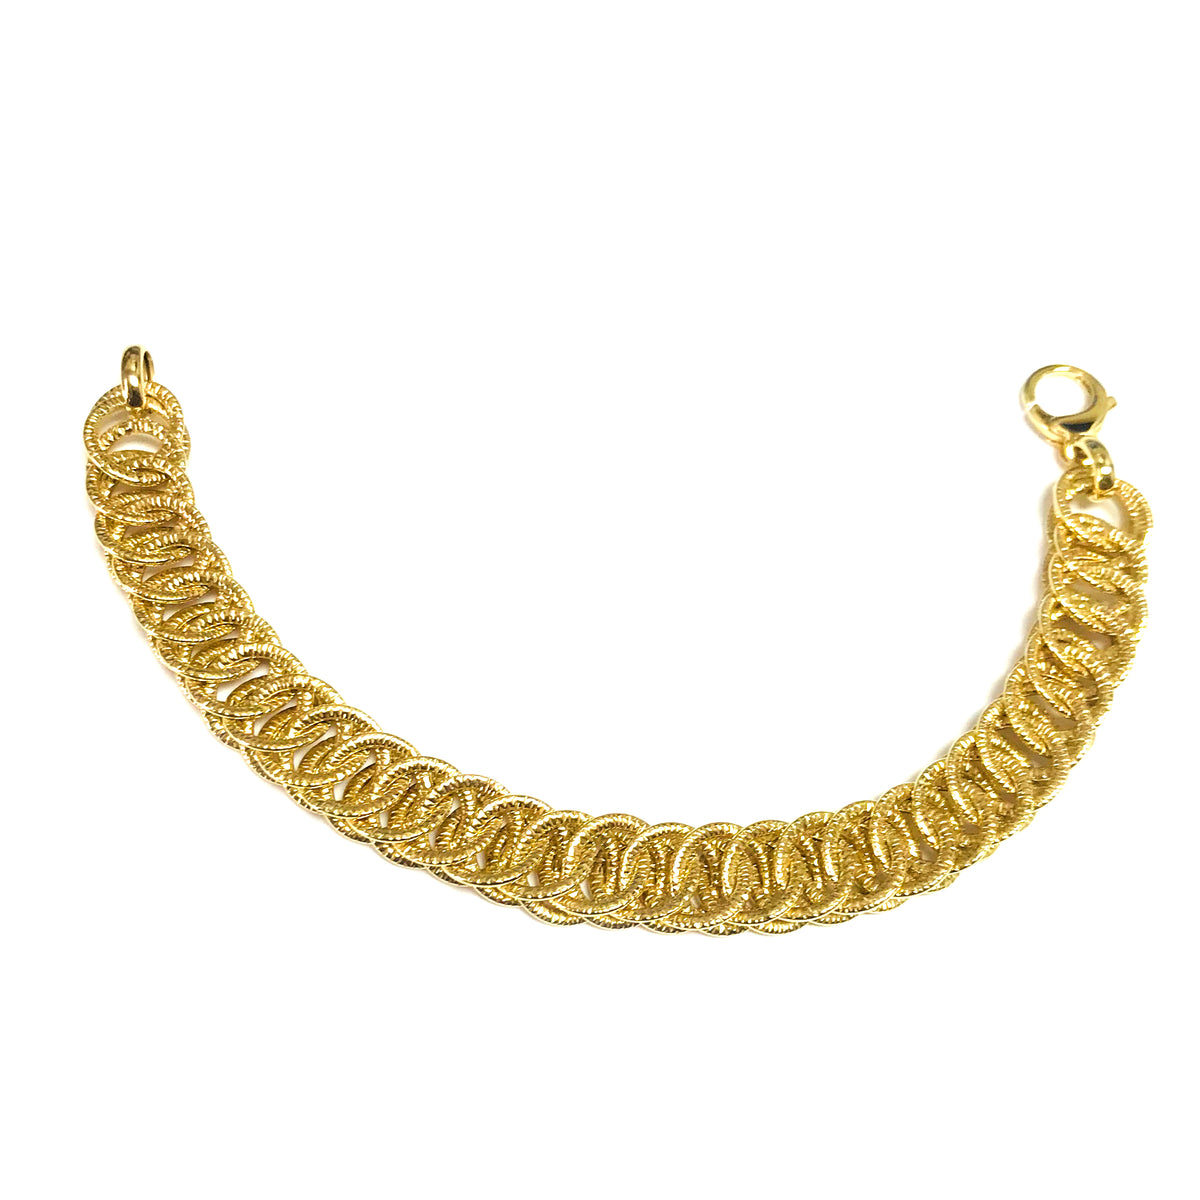 14k Yellow Gold Double Round Woven Link Fancy Bracelet, 7.75" fine designer jewelry for men and women